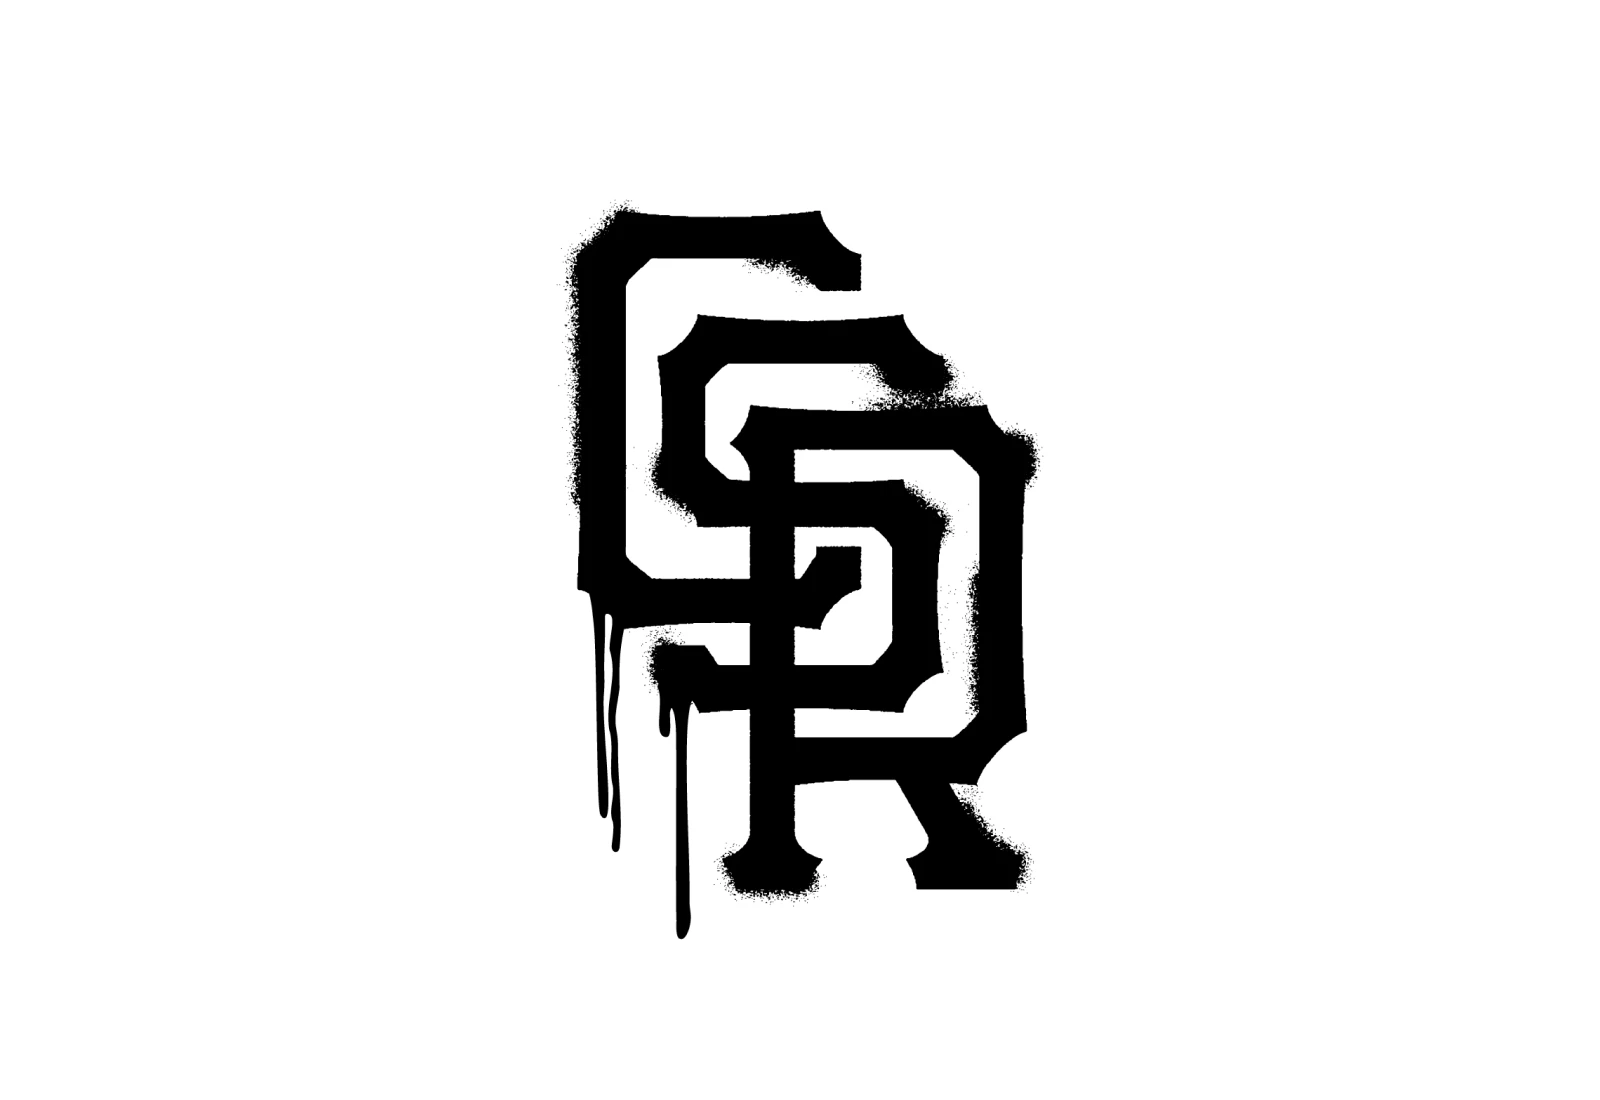 Crete St Riot - CSR Monogram inspired by SF Giants in a spray paint stencil texture